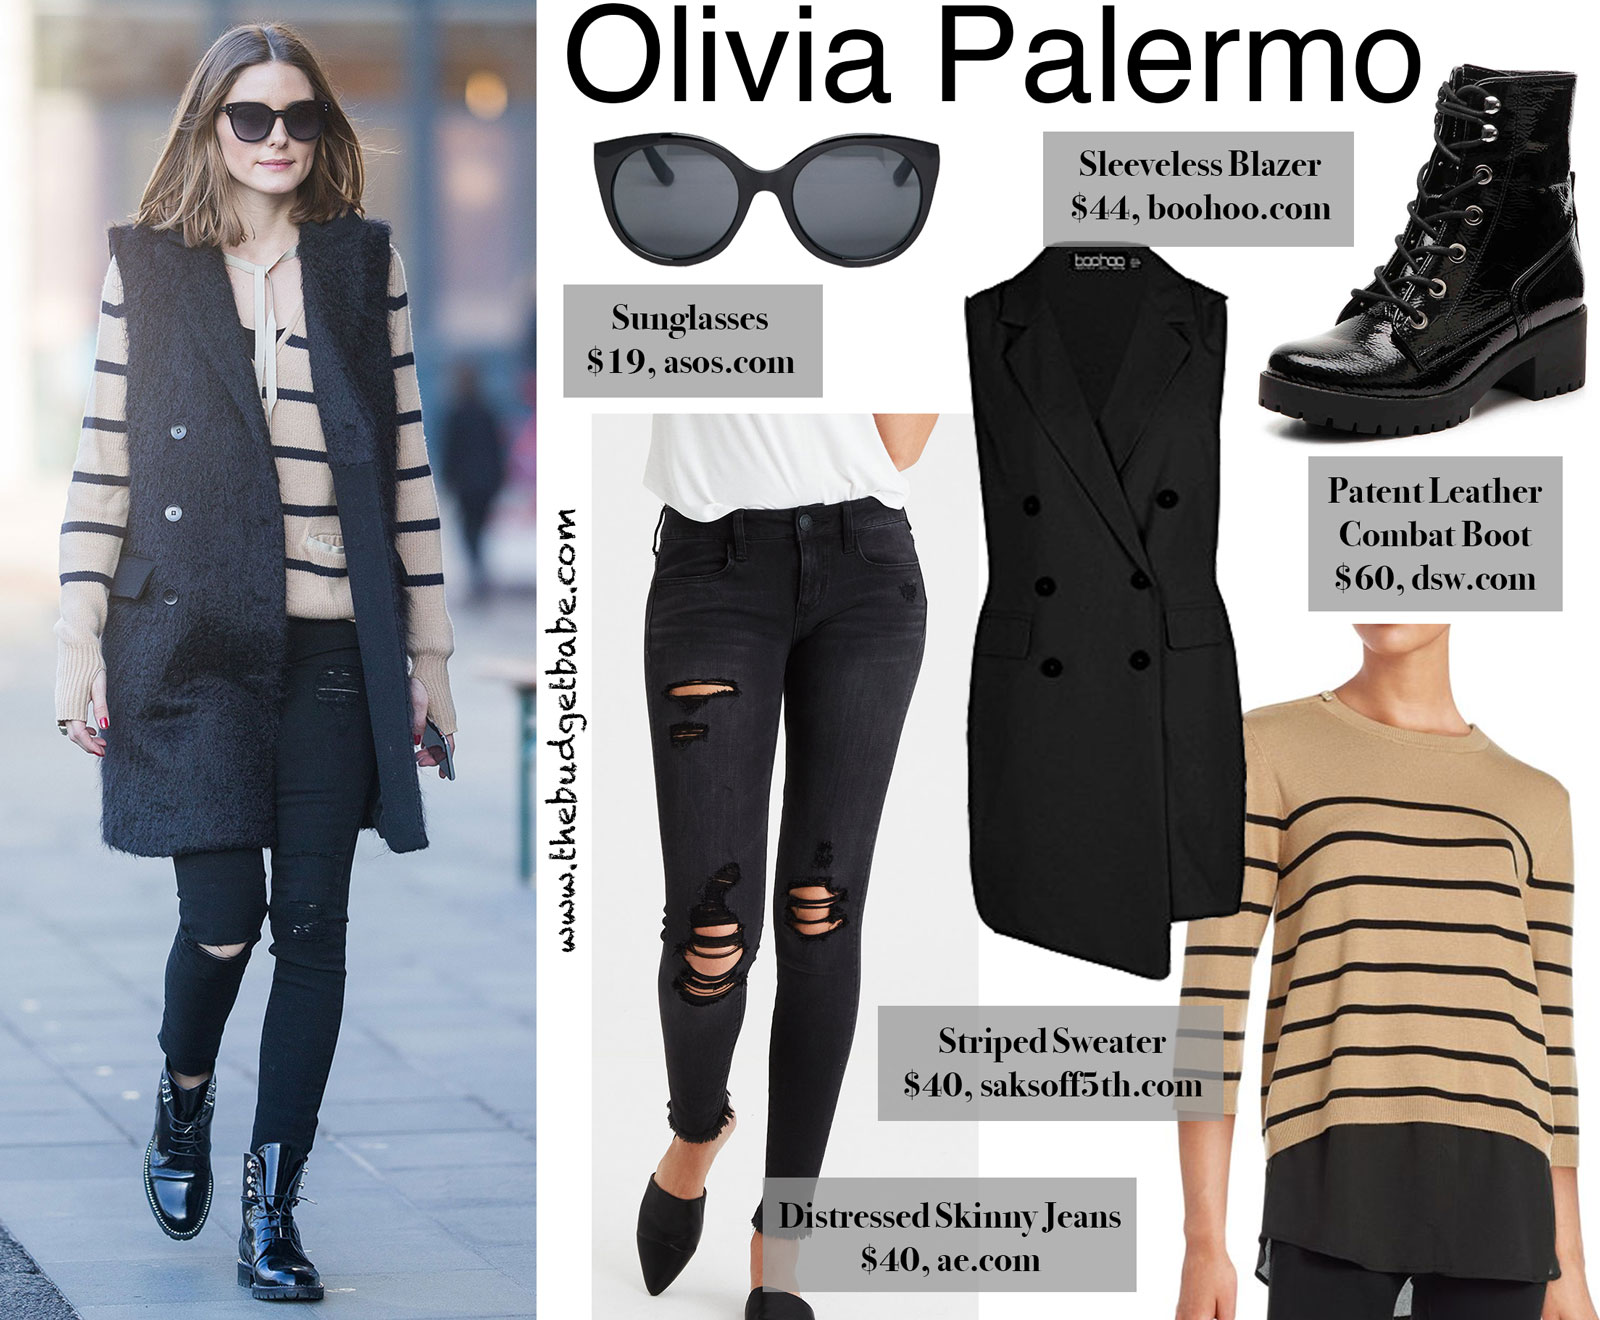 Olivia Palermo Long Vest and Striped Sweater Look for Less